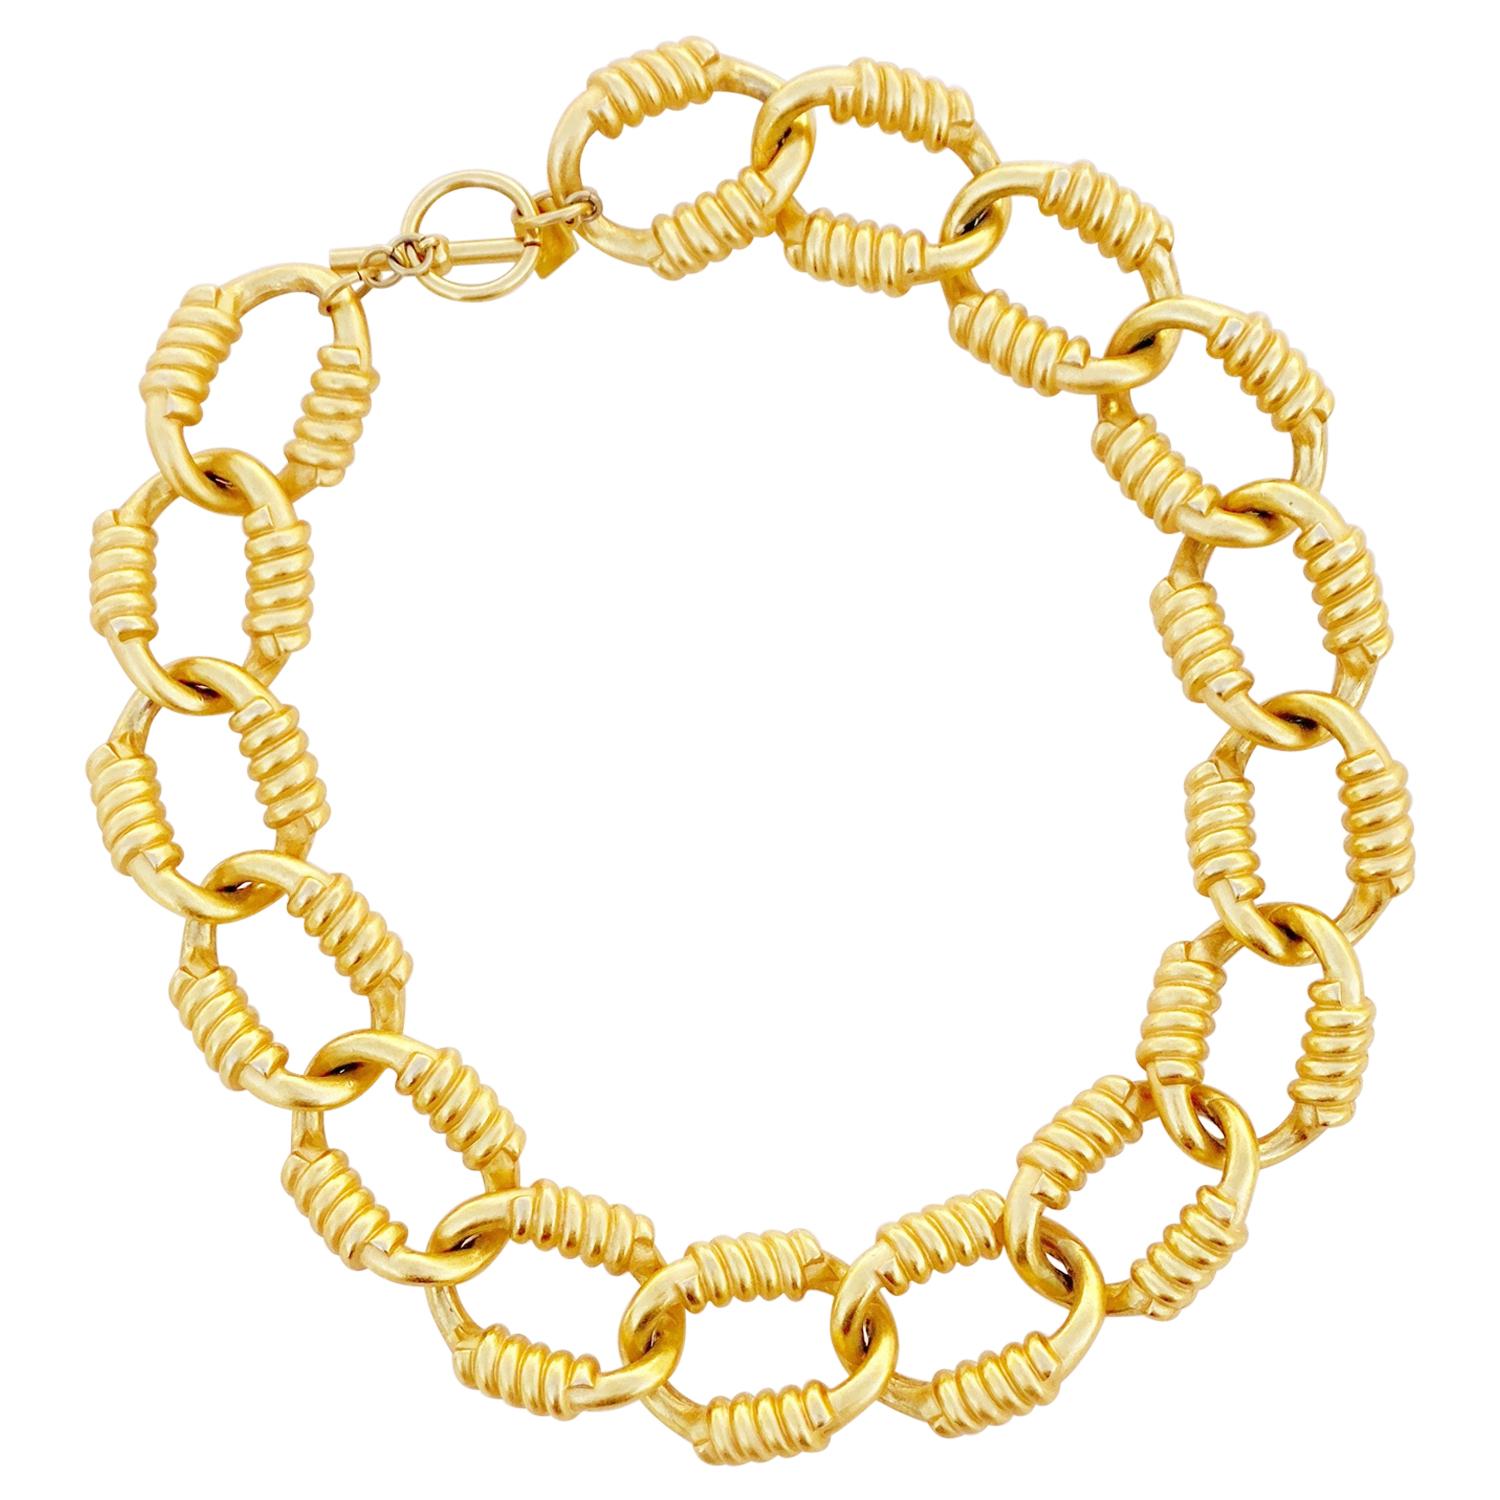 Vintage Gilded Heavy Chain Link Statement Choker Necklace By Anne Klein, 1980s